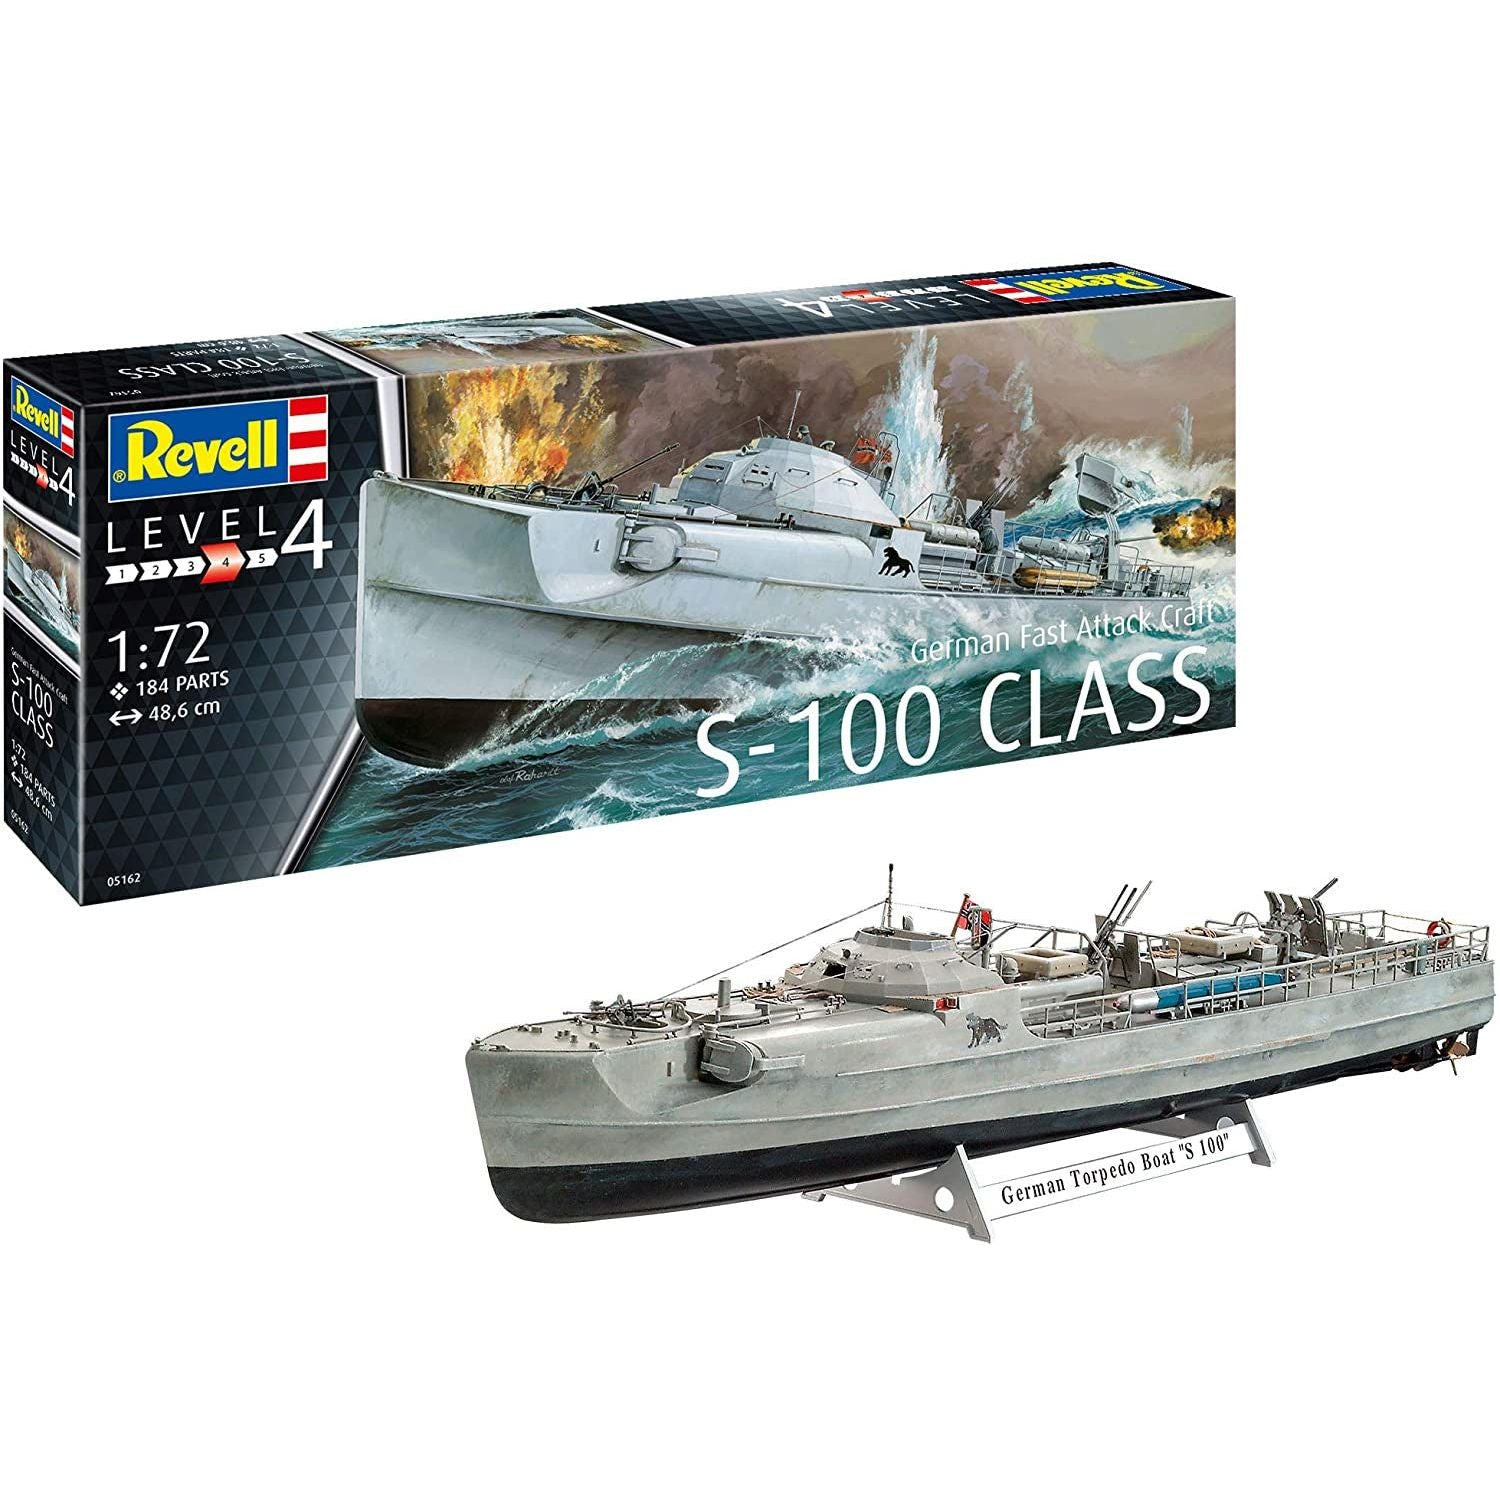 German Fast Attack Craft S-100 Class 1/72 #05162 by Revell